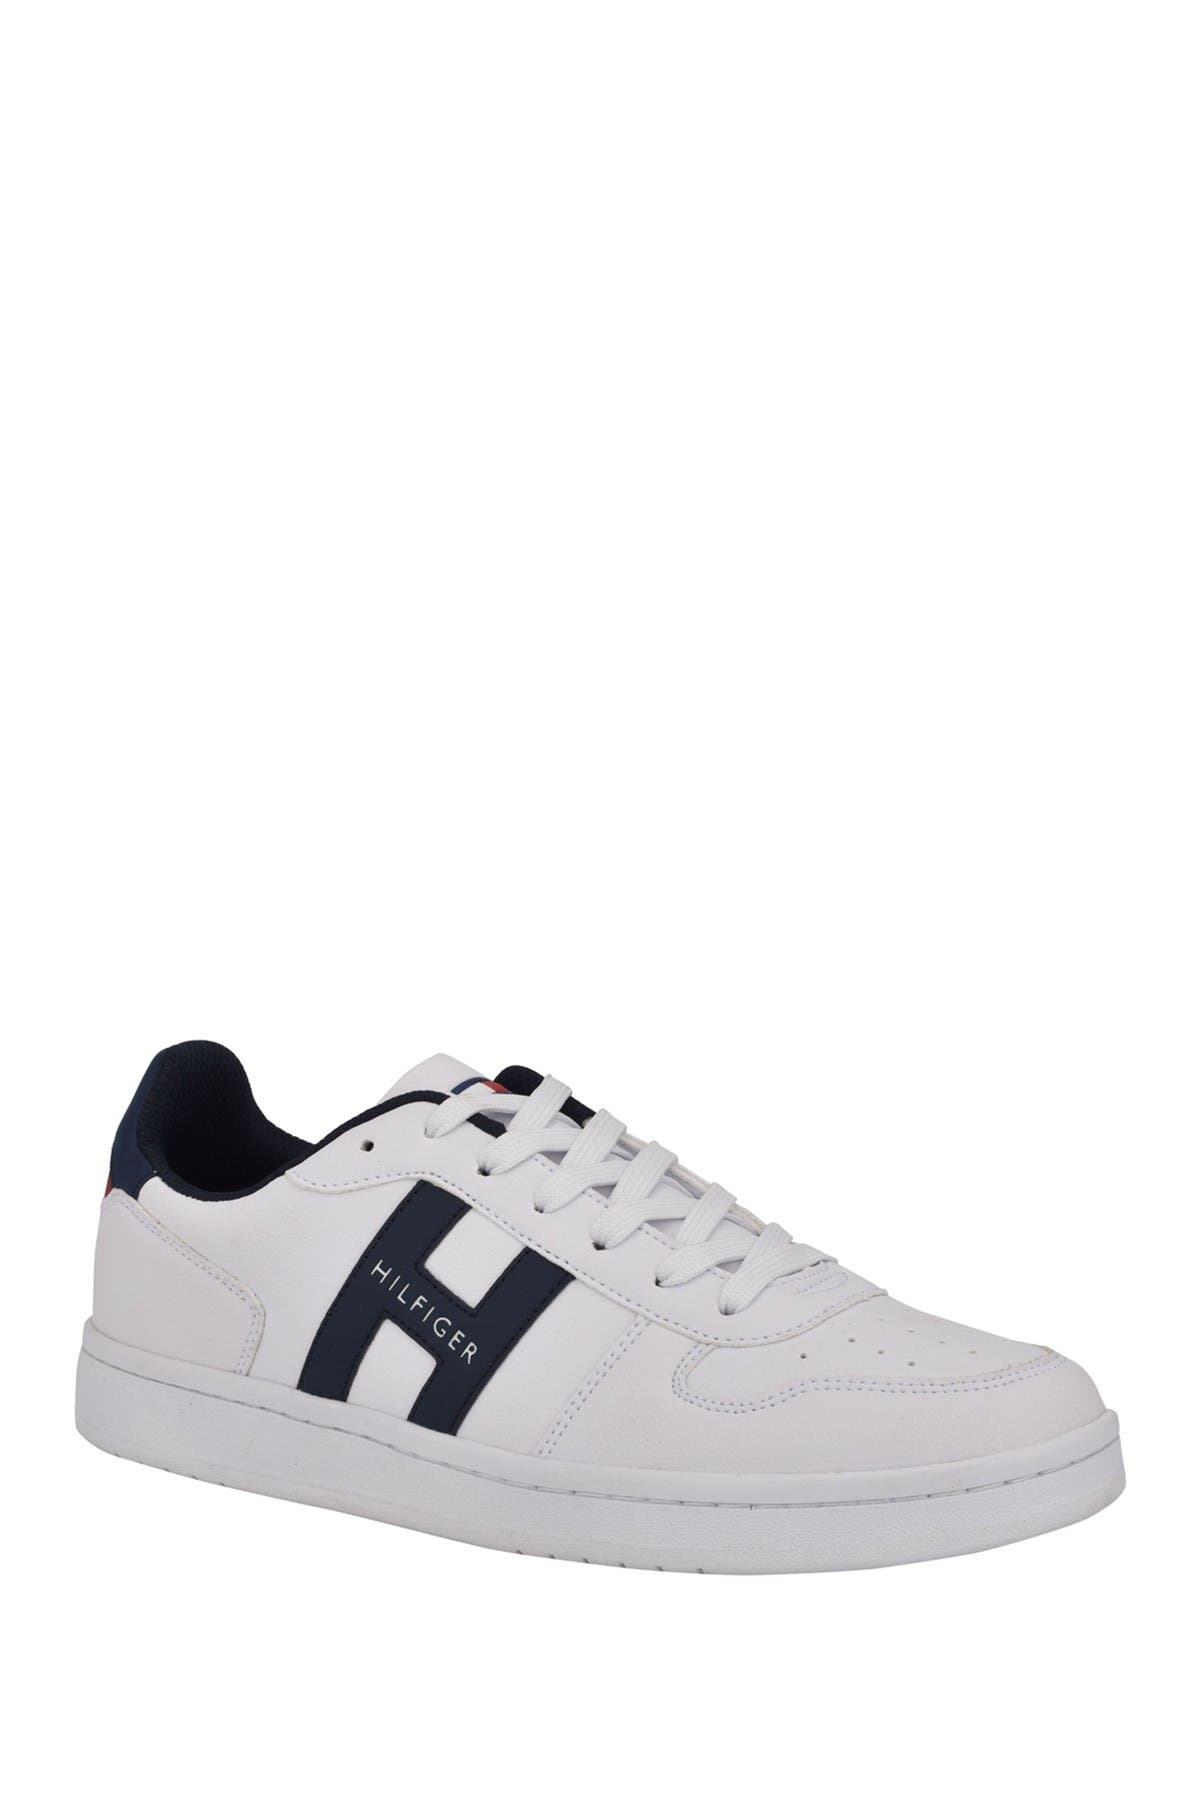 Tommy Hilfiger Leman Lace-up Sneaker In Open White10